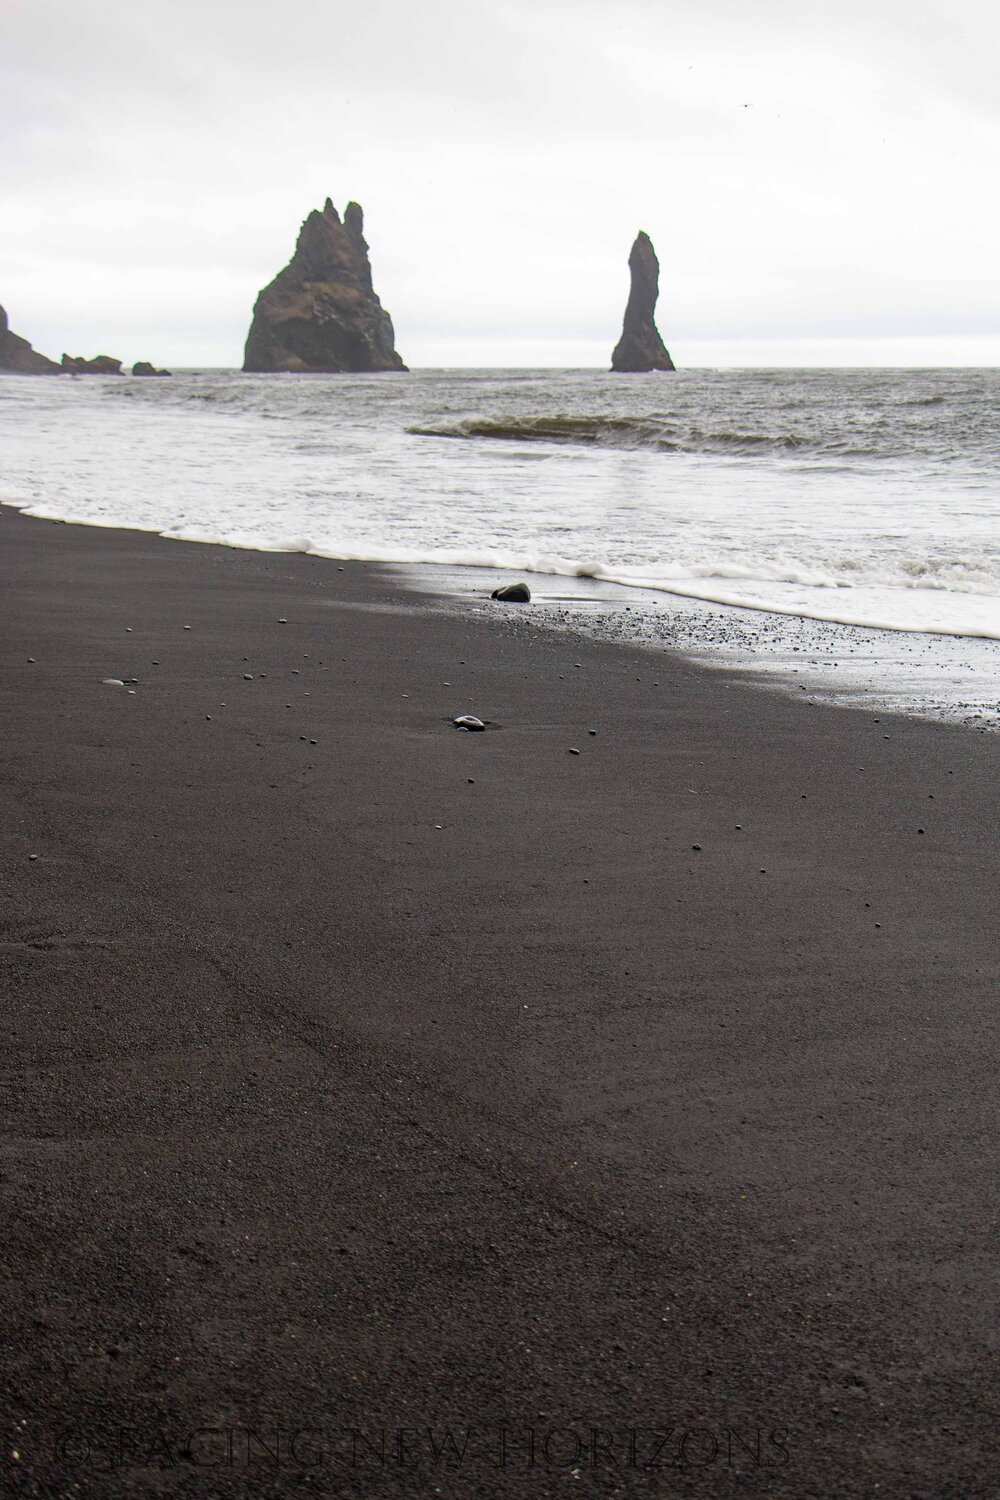  Looking back at Reynisdrangar as we make our way back down the beach. It is difficult to leave such a captivating place 